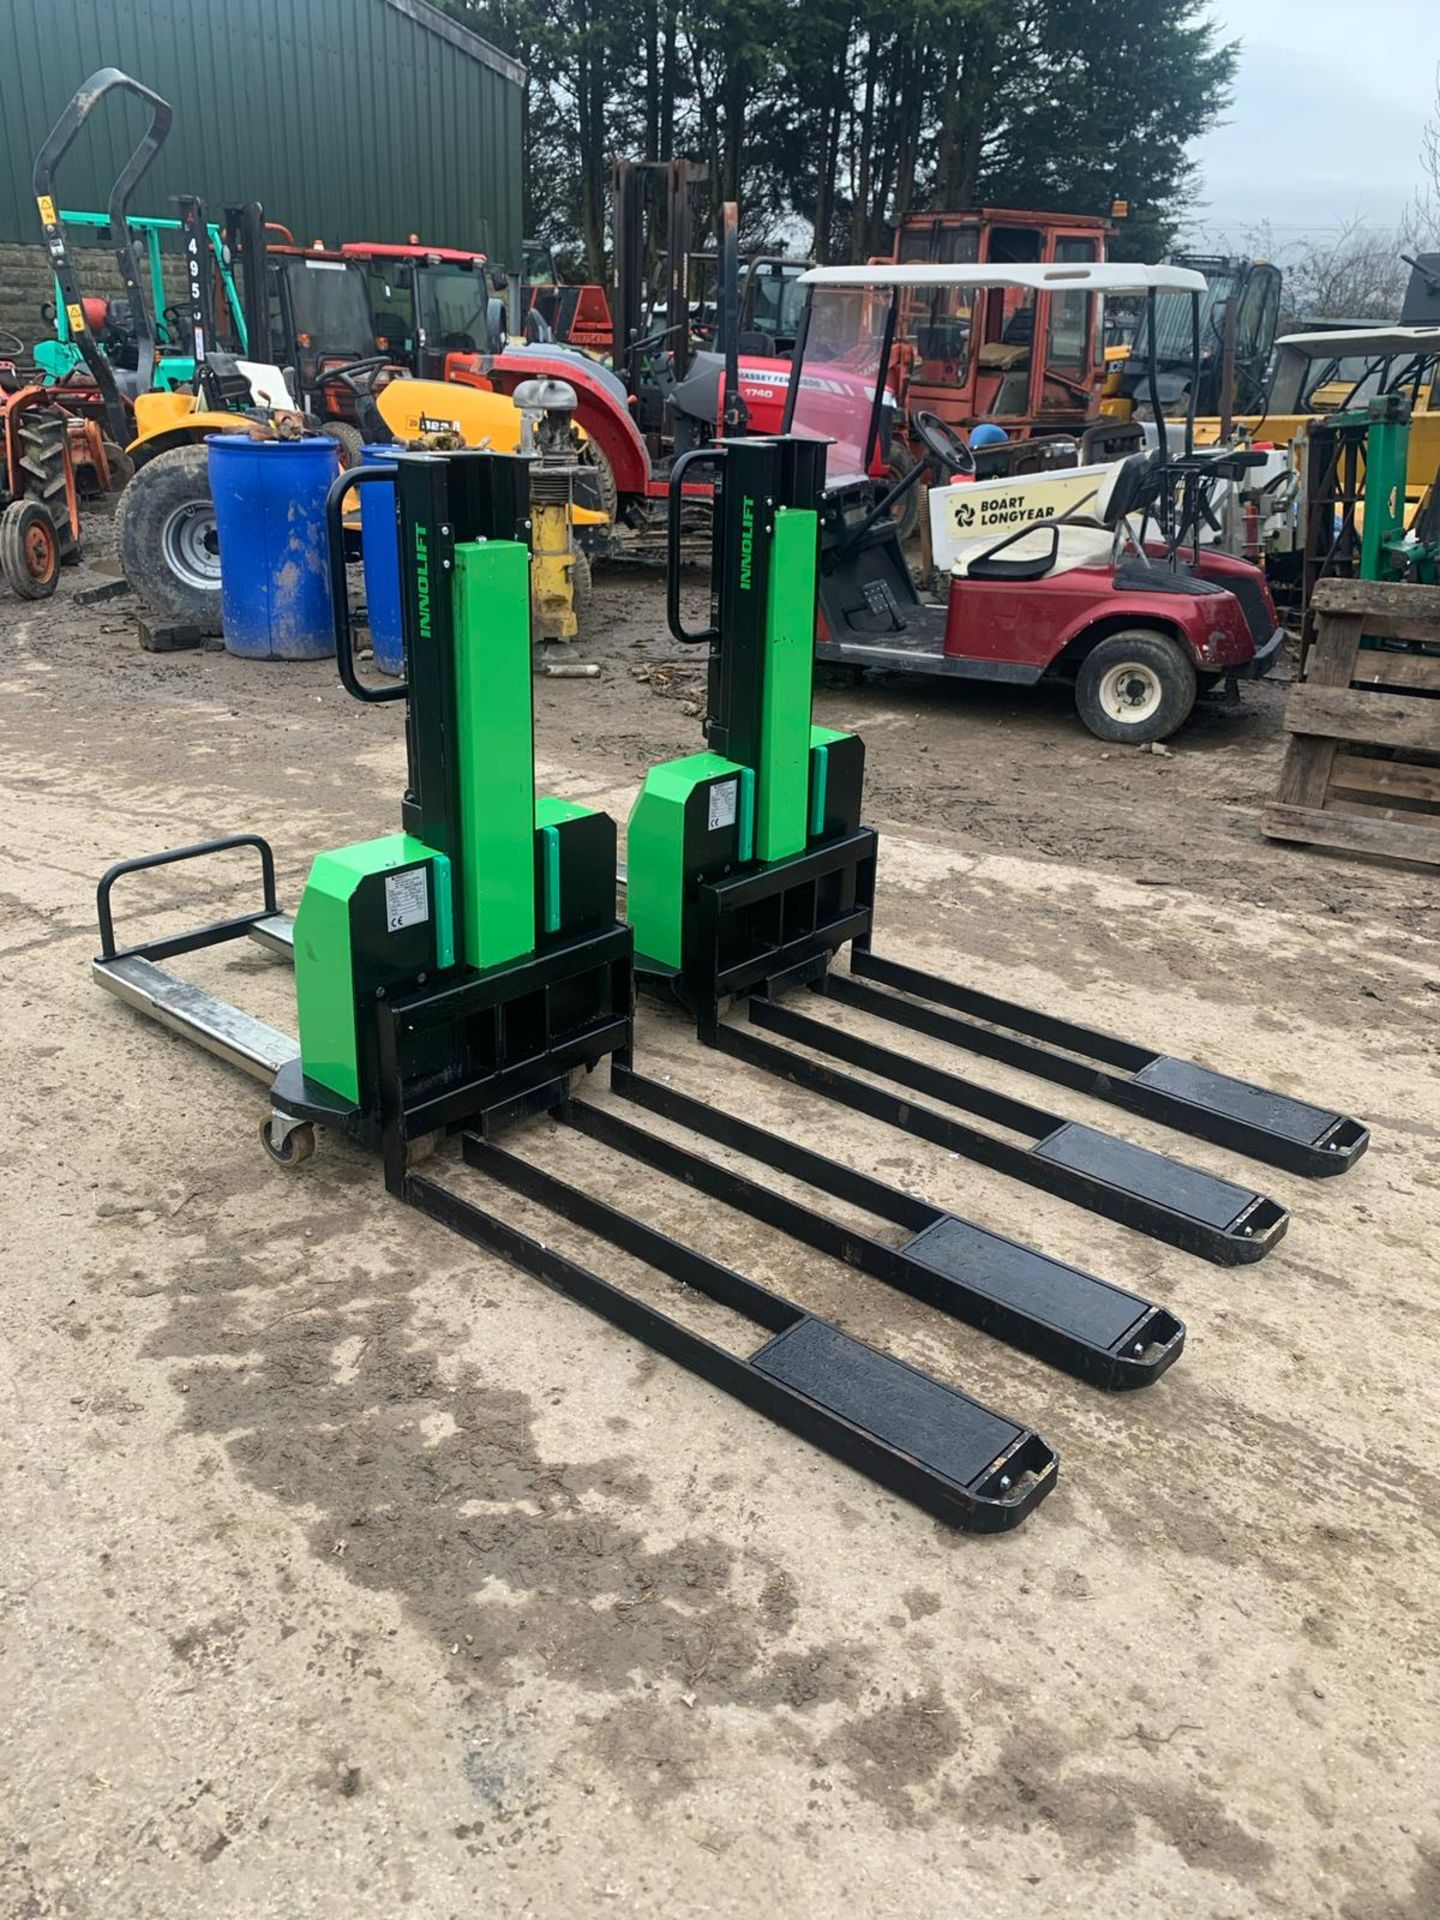 2018 INNOLIFT IM600.800 ELECTRIC PALLET TRUCKS, ALL WORKS, CLEAN MACHINE, YOU ARE BIDDING FOR ONE